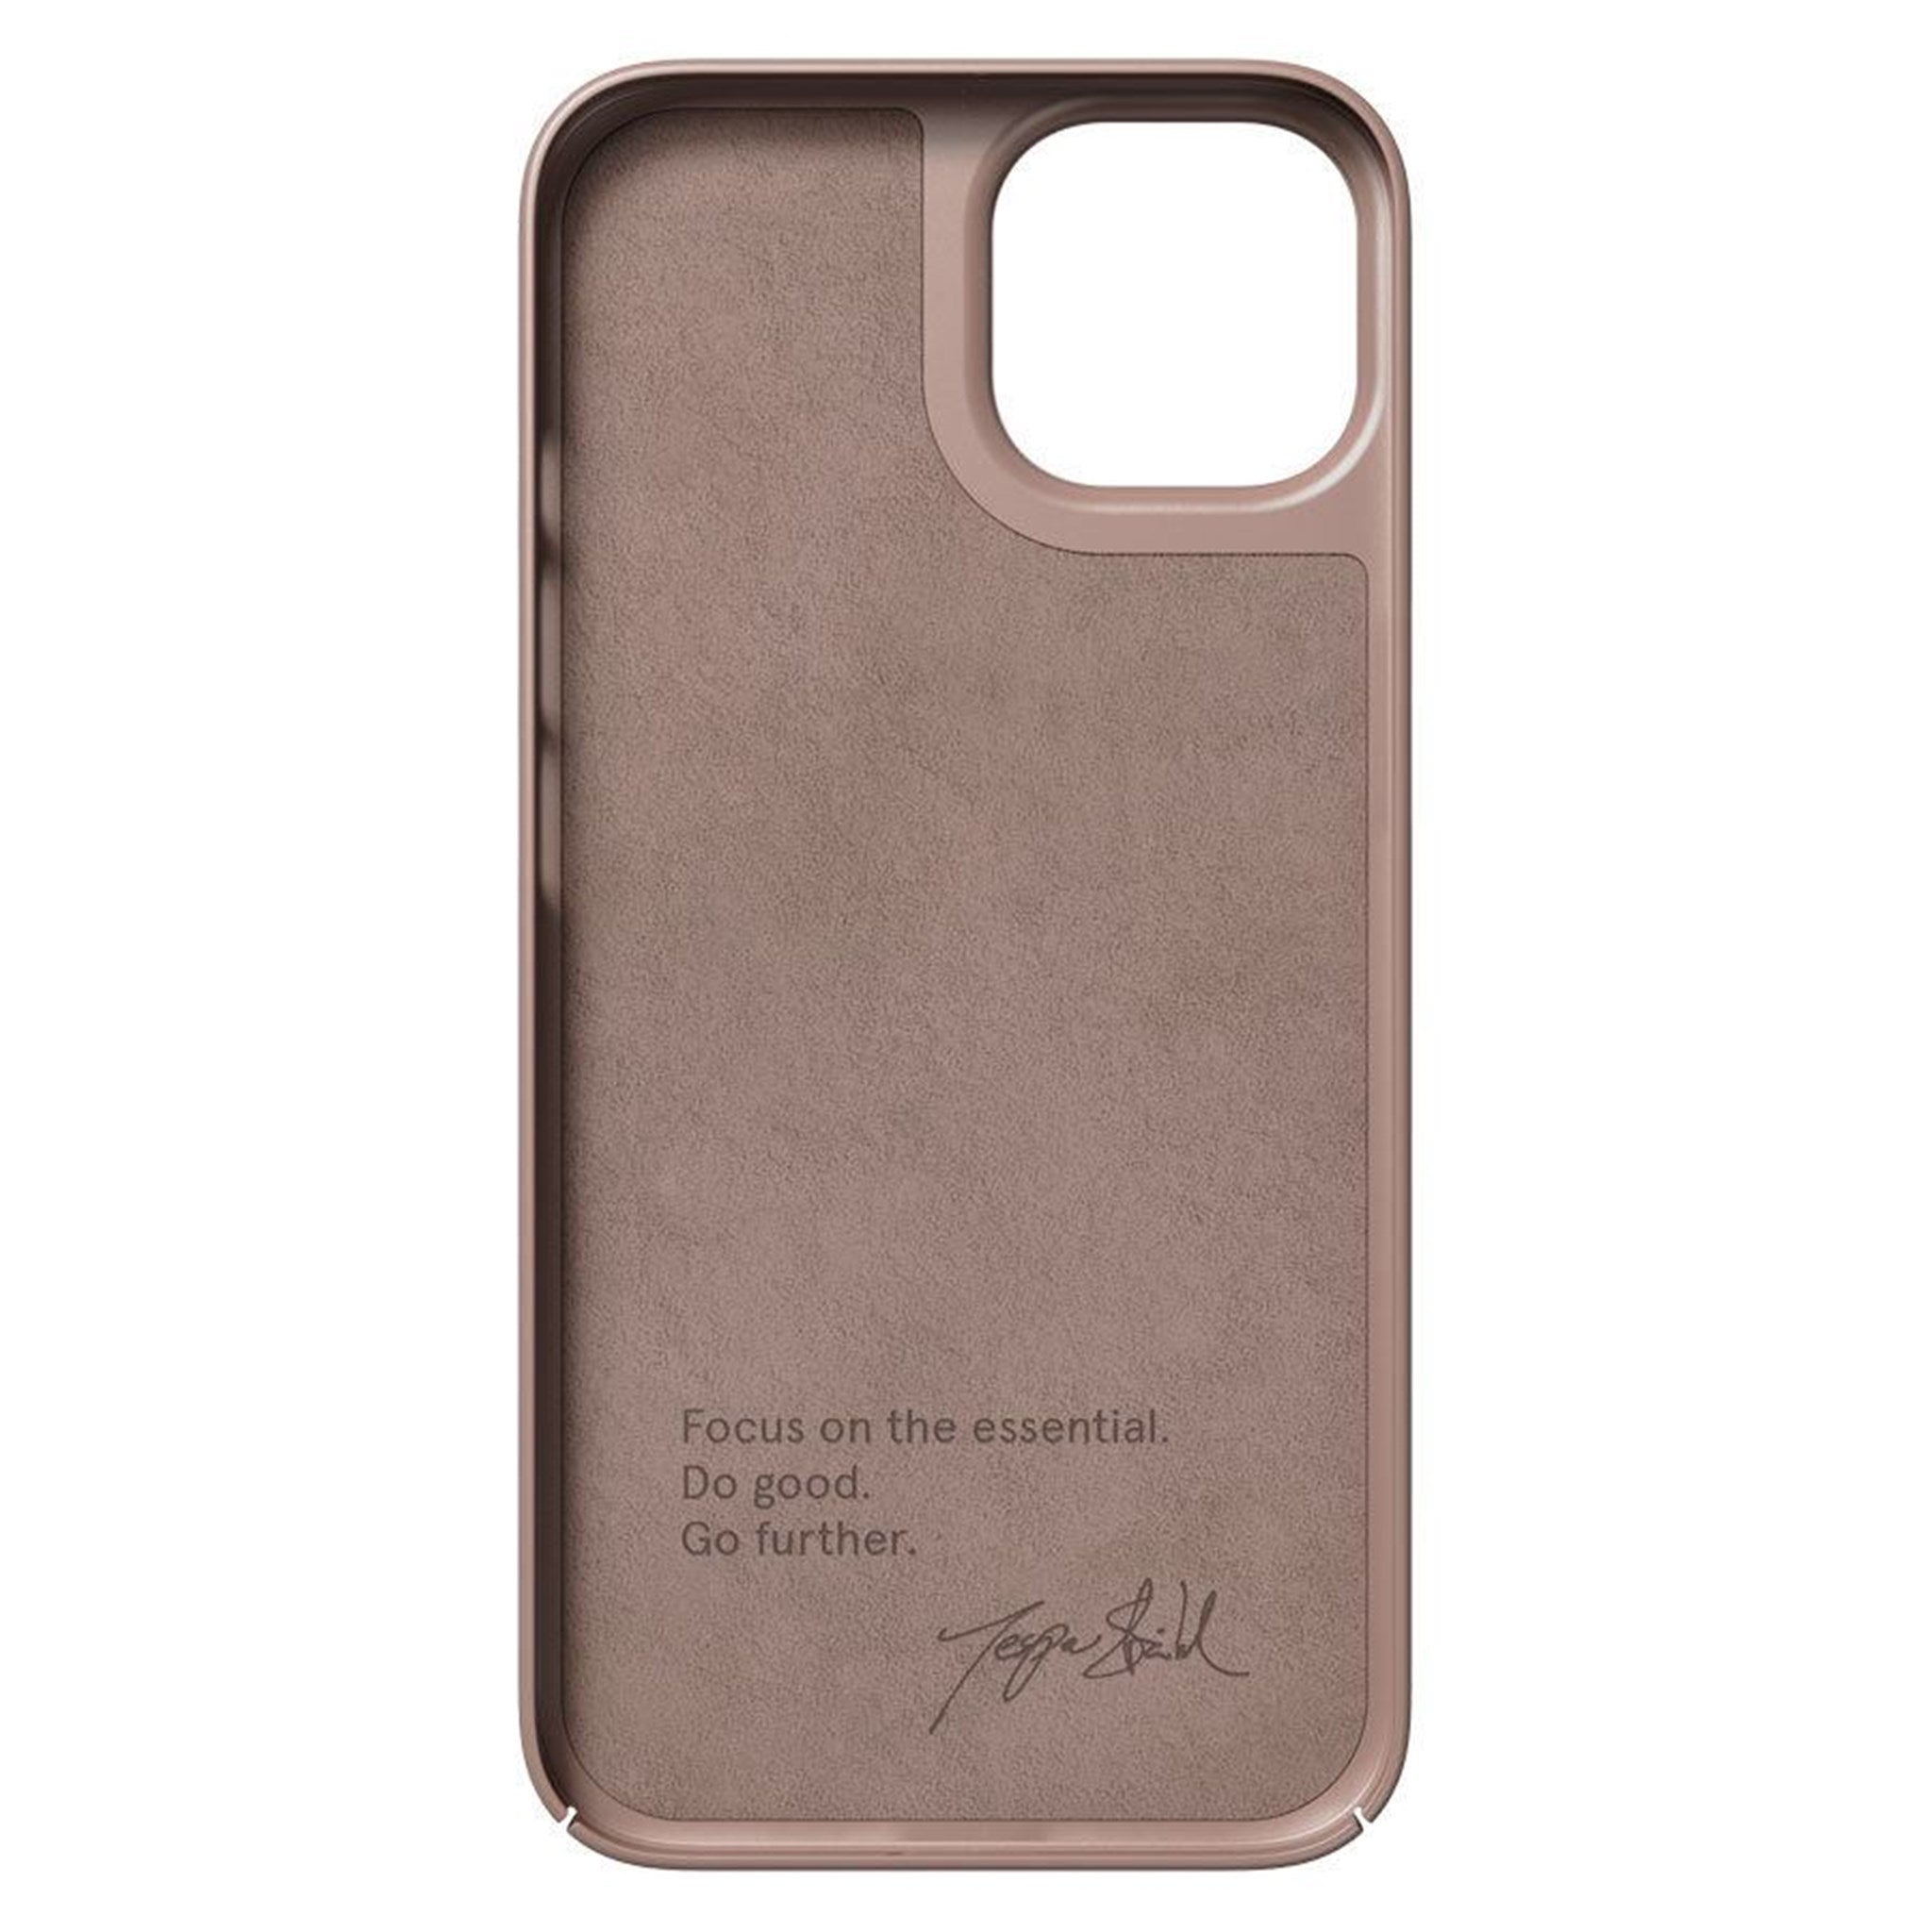 00-000-0048-0006_Nudient-iPhone-14-Thin-Cover-Dusty-Pink_02.jpg